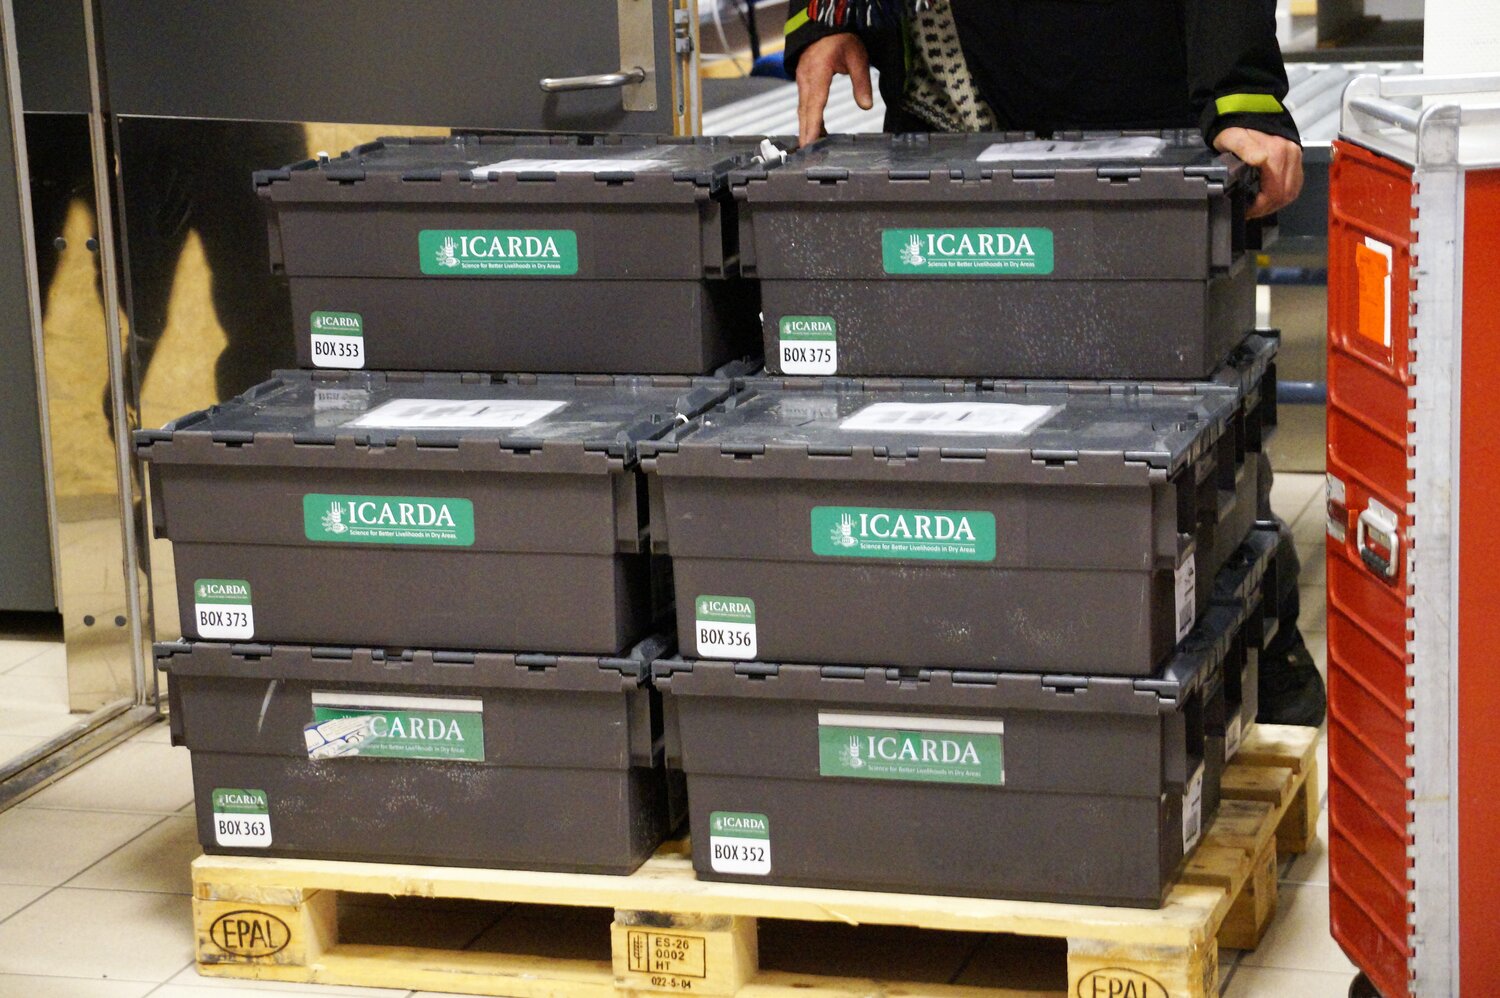 15,000 + accessions from ICARDA are returned to Svalbard after being withdrawn from the vault in 2015. Photo: Andrea Gros, ICARDA